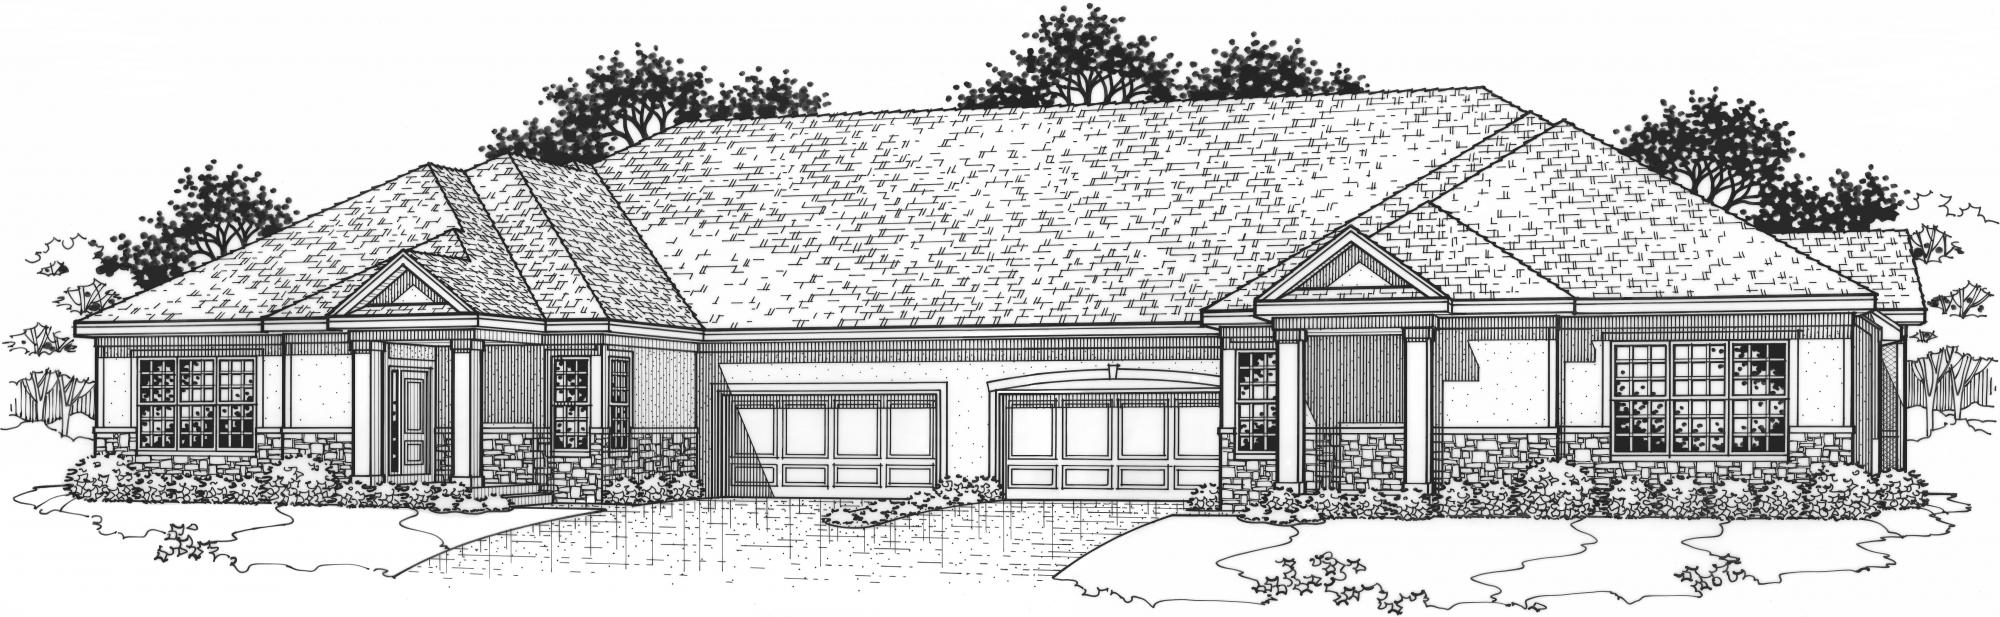 black and white rendering of a minor model from Lambie custom homes